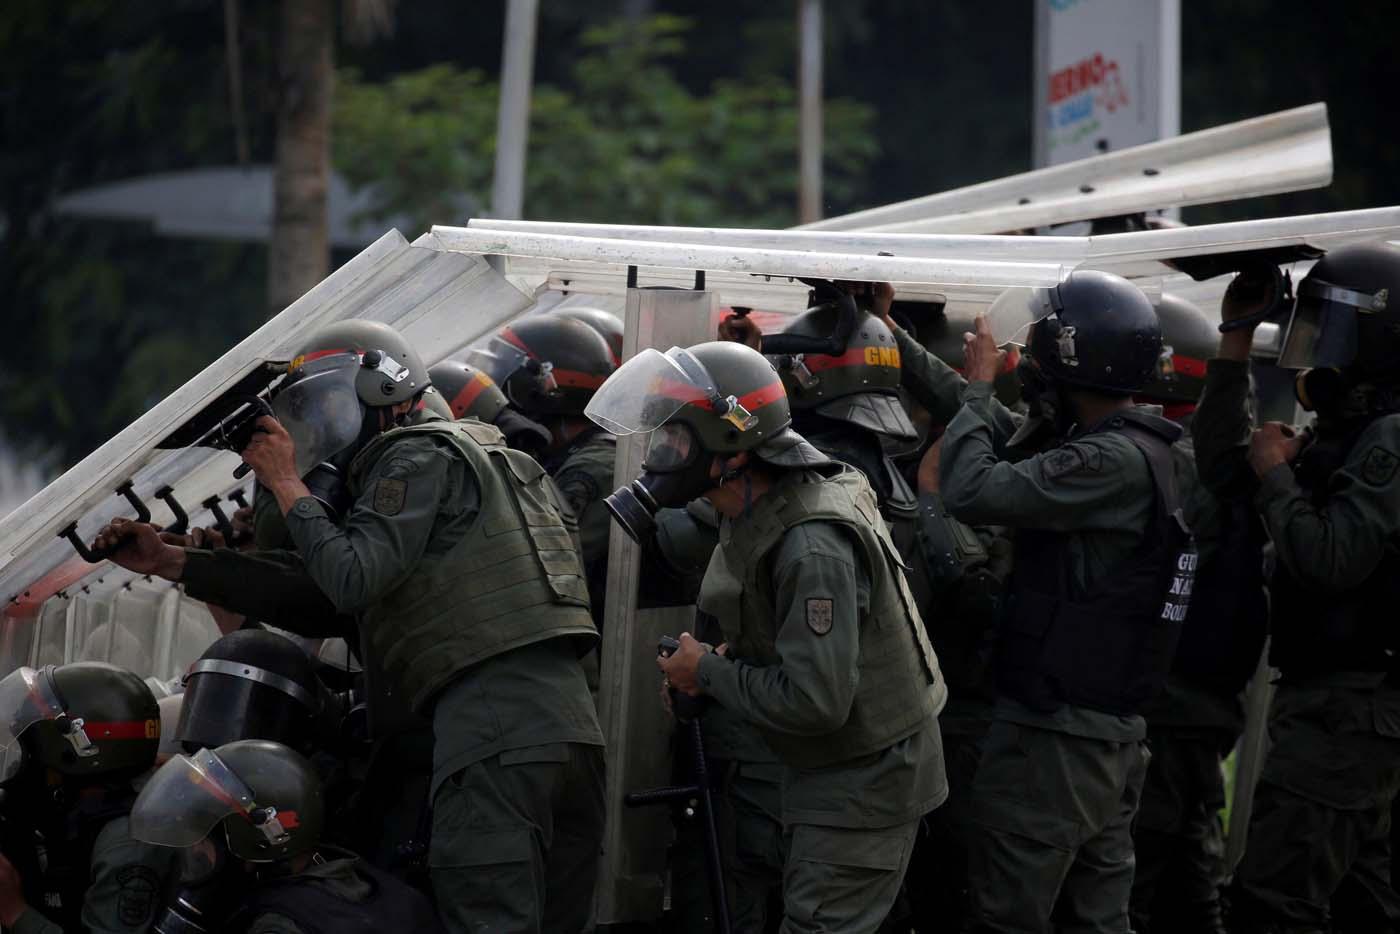 Riot security forces take cover while clashing with demonstrators rallying against President Nicolas Maduro in Caracas, Venezuela, May 24, 2017. REUTERS/Carlos Barria